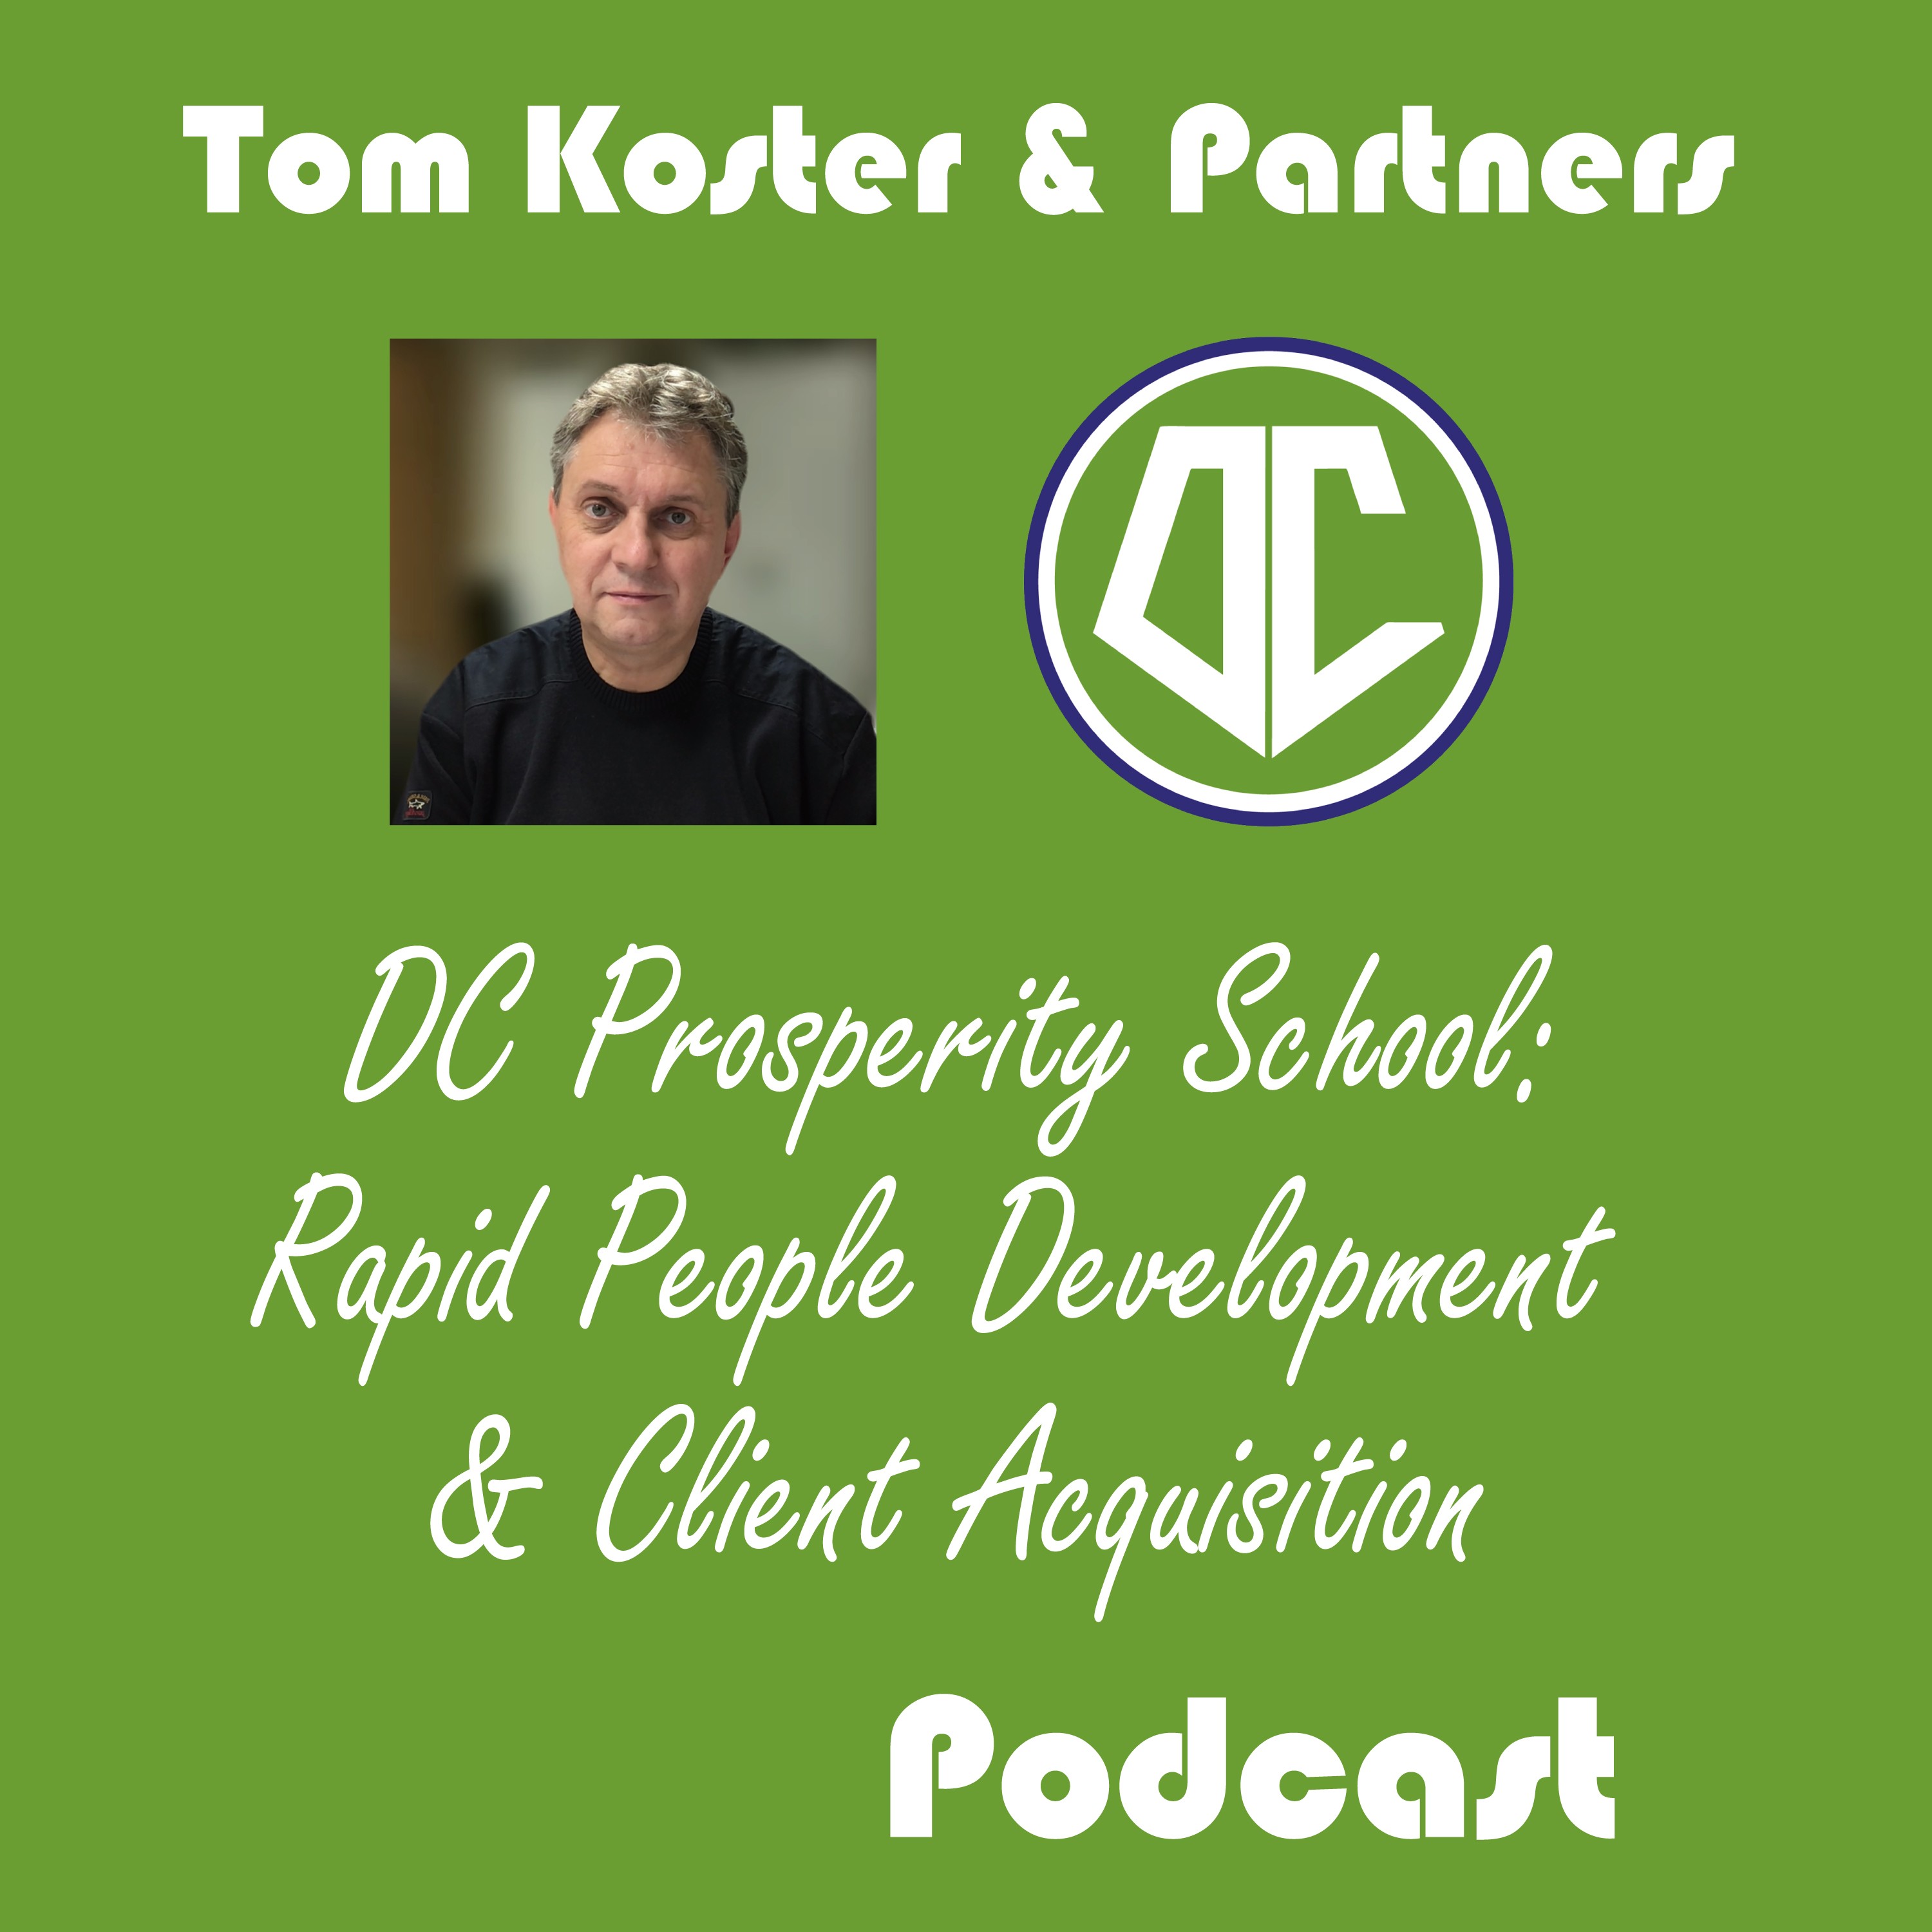 DC Prosperity School - Rapid people development & client acquisition in the $100 Billion a year (and growing) creator economy, digital agency, people development & technology business! - Podcast